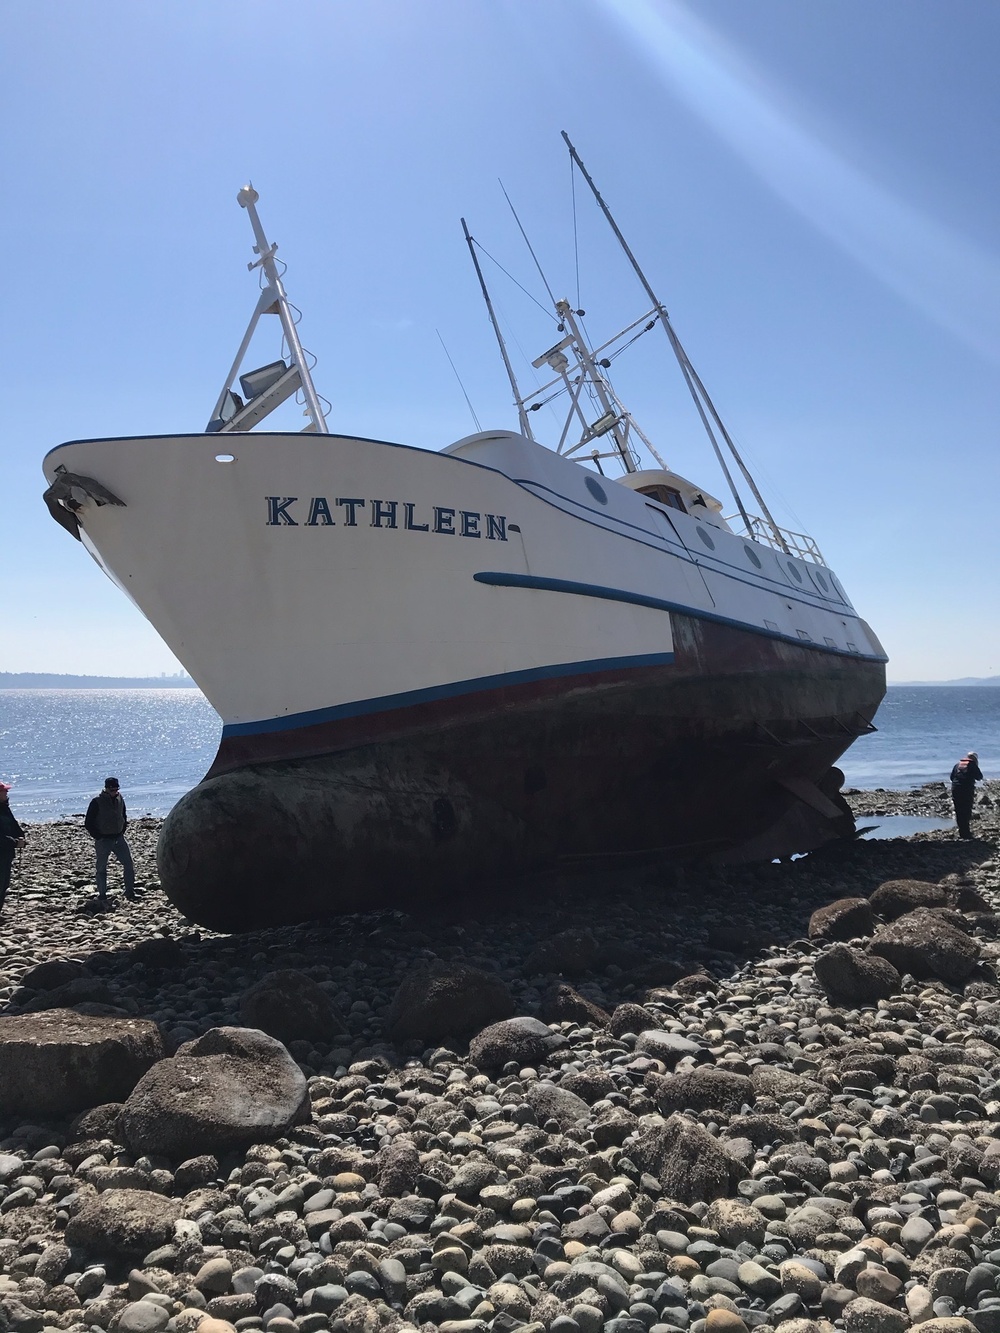 Coast Guard Sector Puget Sound personnel respond to aground vessel